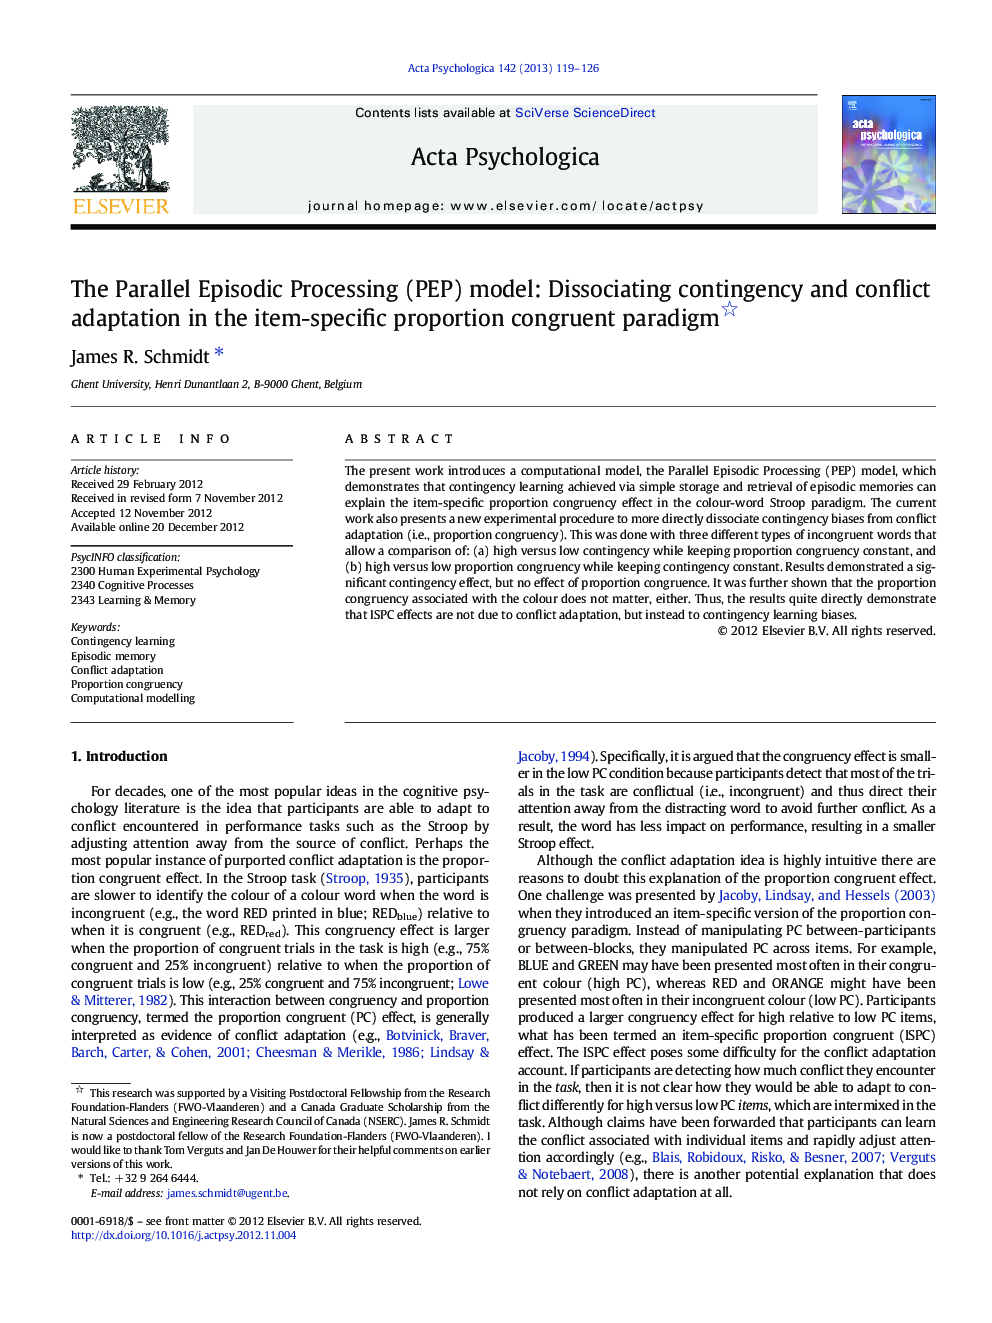 The Parallel Episodic Processing (PEP) model: Dissociating contingency and conflict adaptation in the item-specific proportion congruent paradigm 